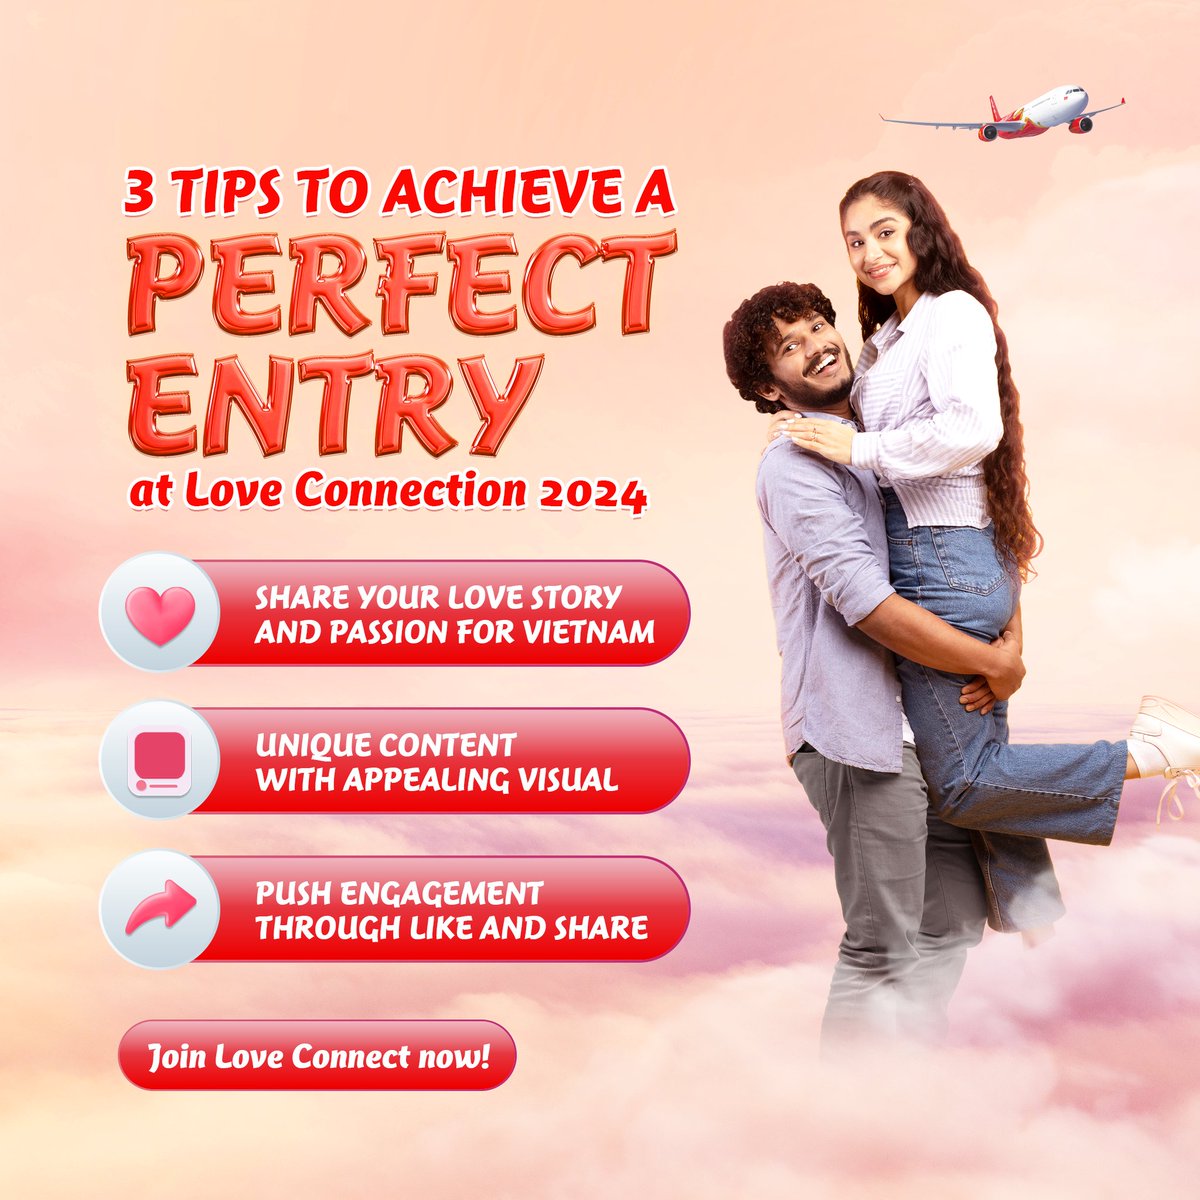 3 tips for the perfect entry: 1️⃣ Share your own love story & why you adore Vietnam. 2️⃣ Get creative with your video and content! 3️⃣ Rally votes at loveconnection.vietjetair.com/gallery ⏰ Contest ends 31/05/2024 (*) T&C apply #Vietjet